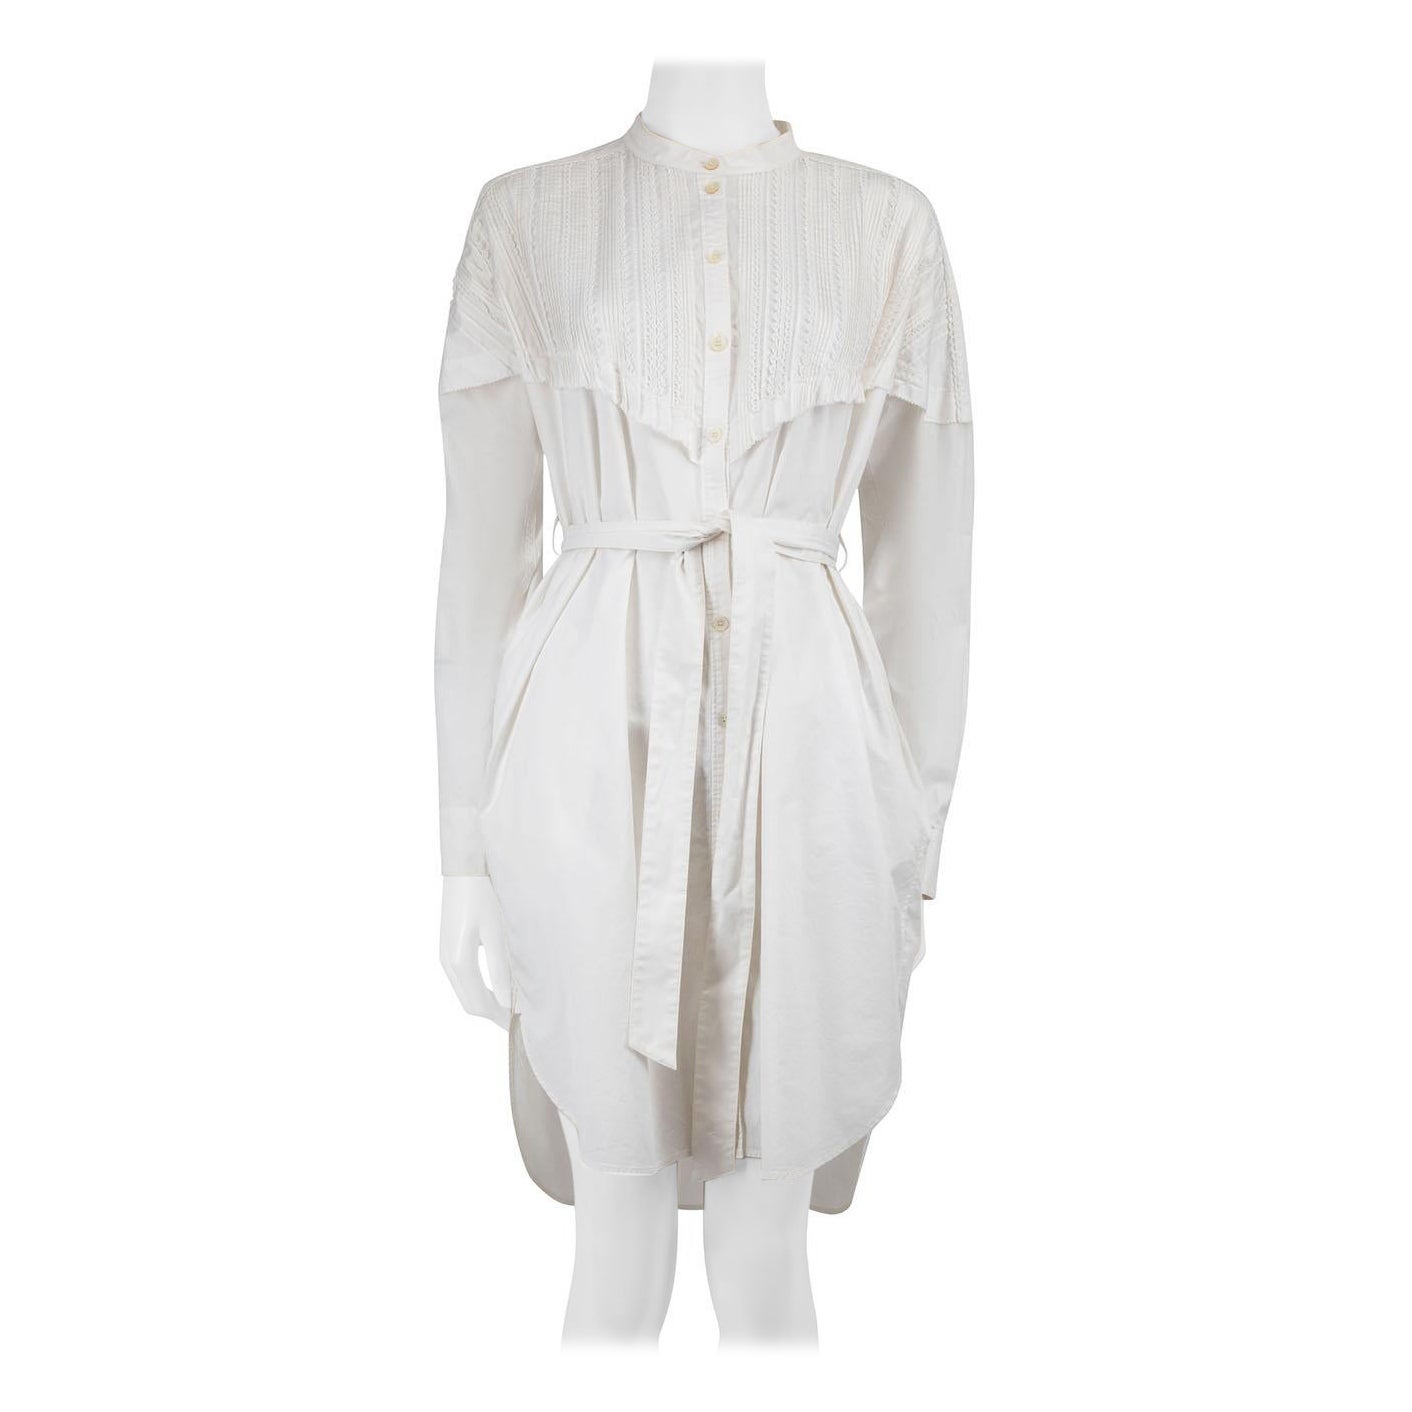 Burberry White Lace Trim Belted Shirt Dress Size M For Sale